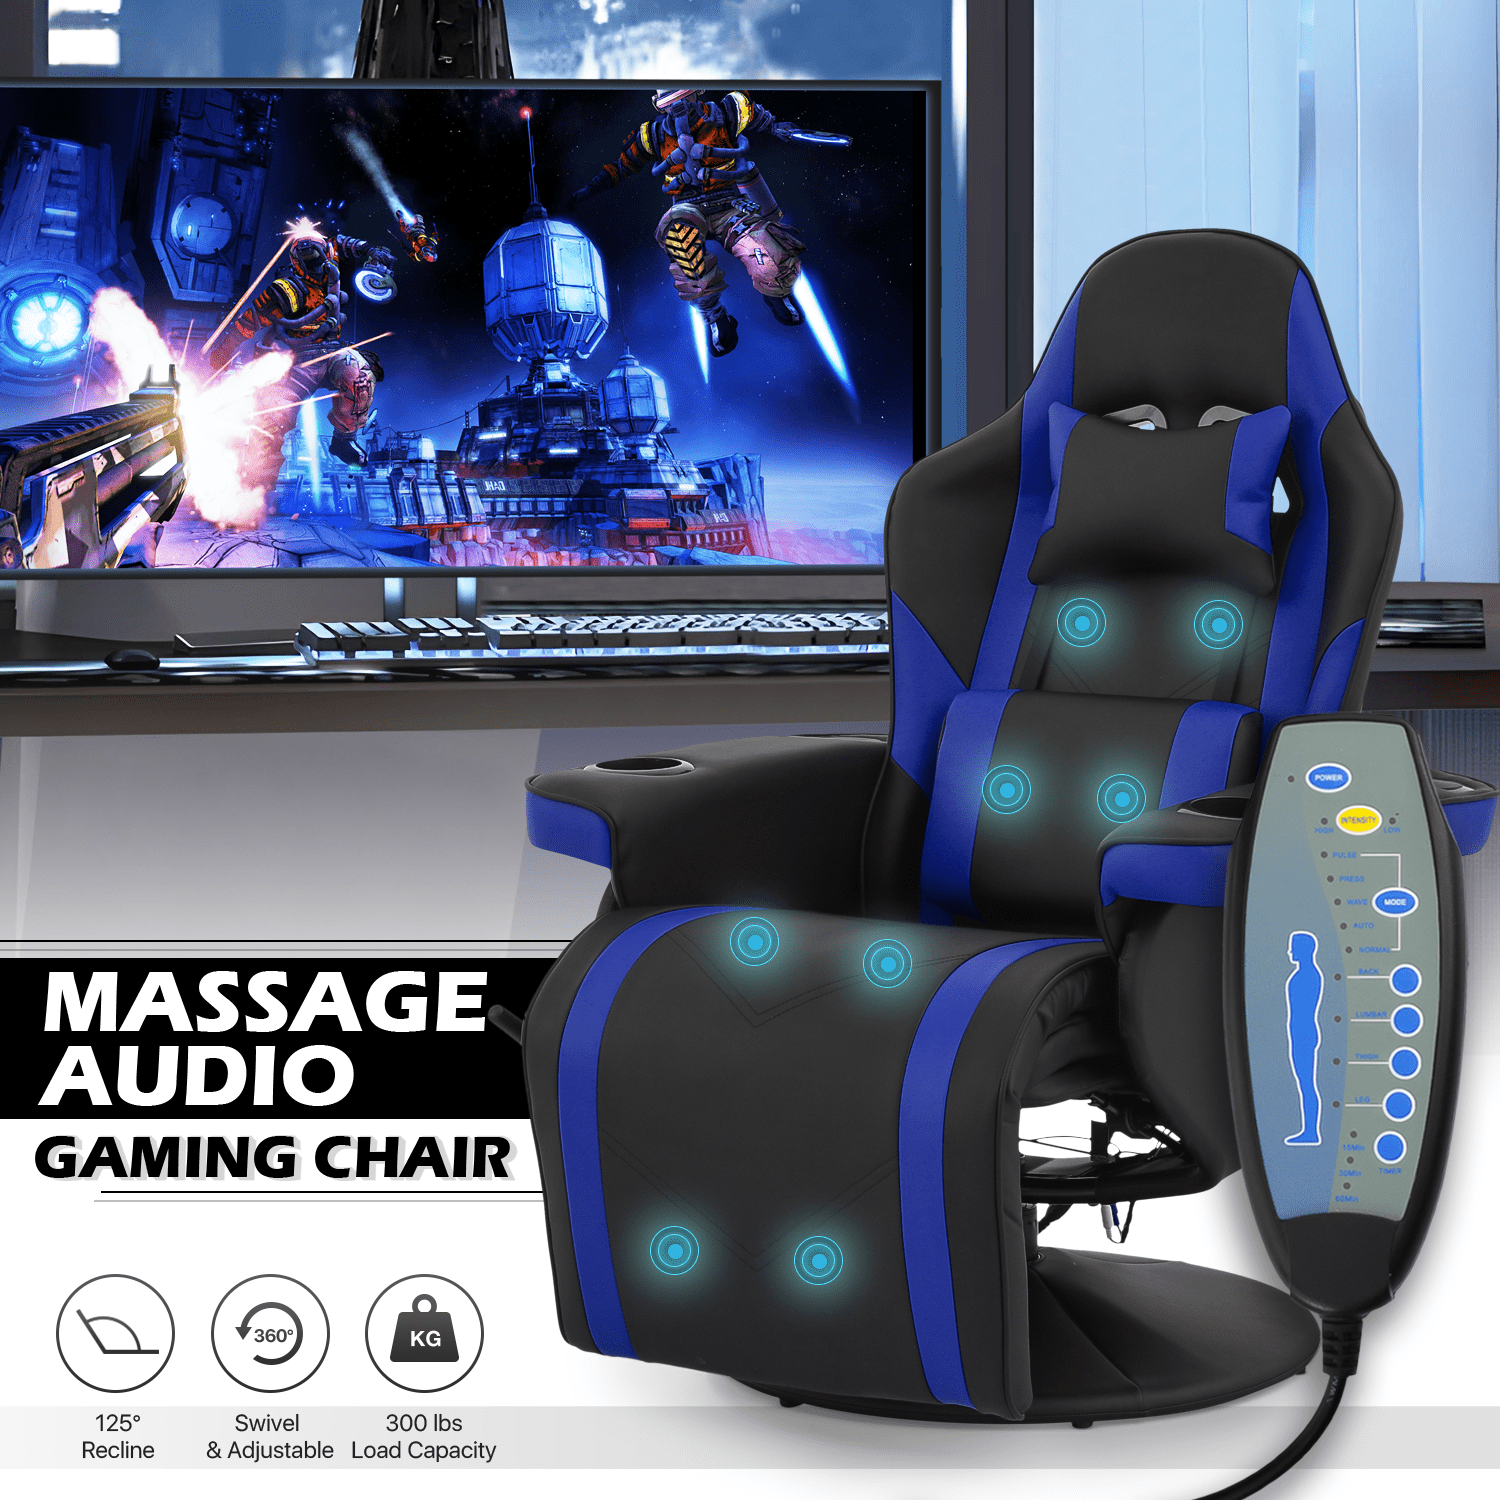 Massage Gaming Recliner Chair with Speaker, Gaming Chair Lumbar & Headrest, Ergonomic Theater Chair with Cup Holder, Blue - Walmart.com